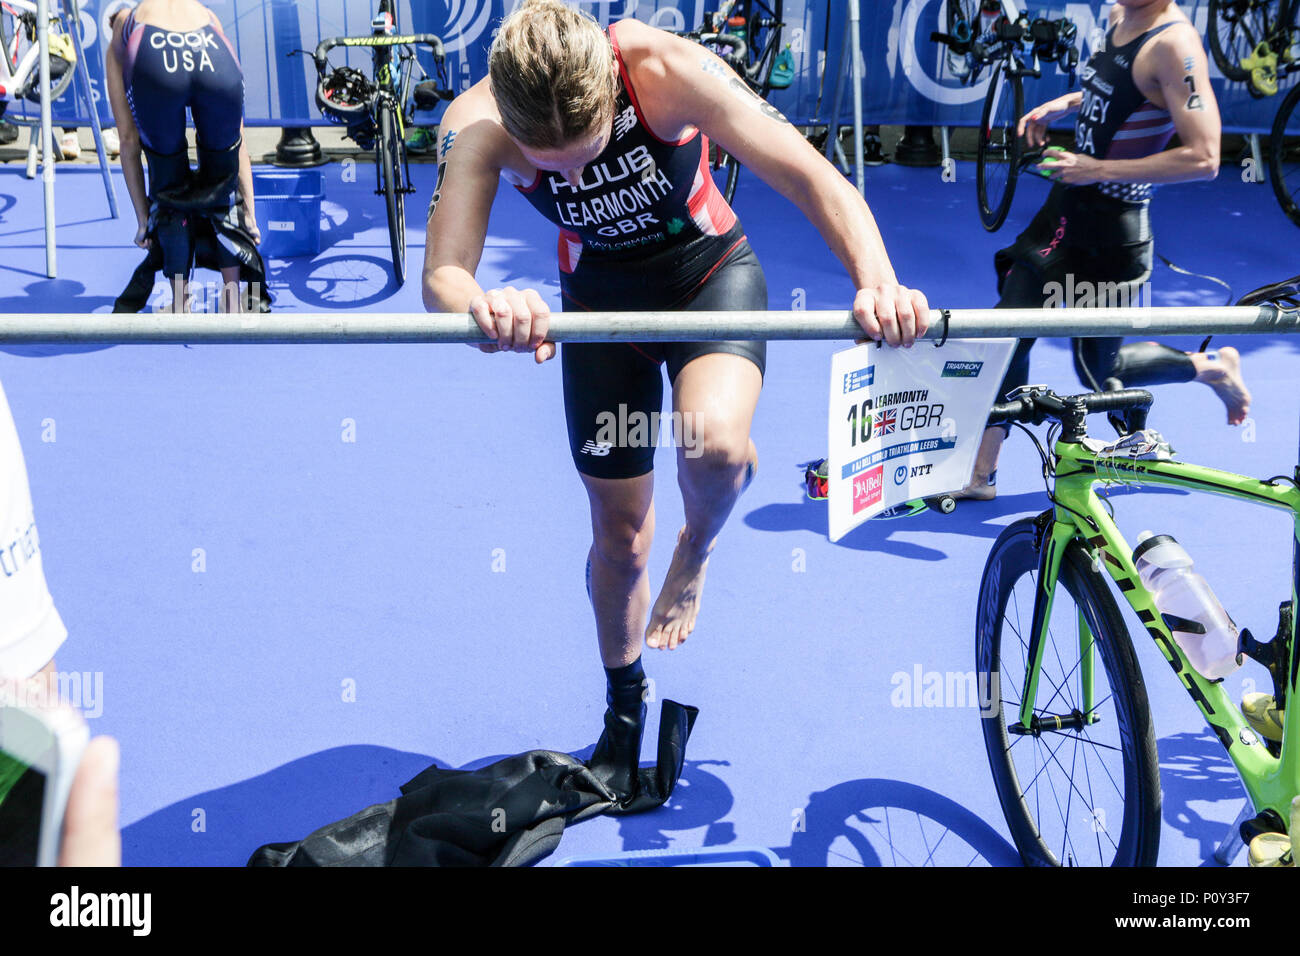 Leeds, UK. 10th June 2018. Jessica Learmonth of Great Britain kicks off her wetsuit in transition  in the Elite Womens race.  Credit: Dan Cooke Credit: Dan Cooke/Alamy Live News Stock Photo